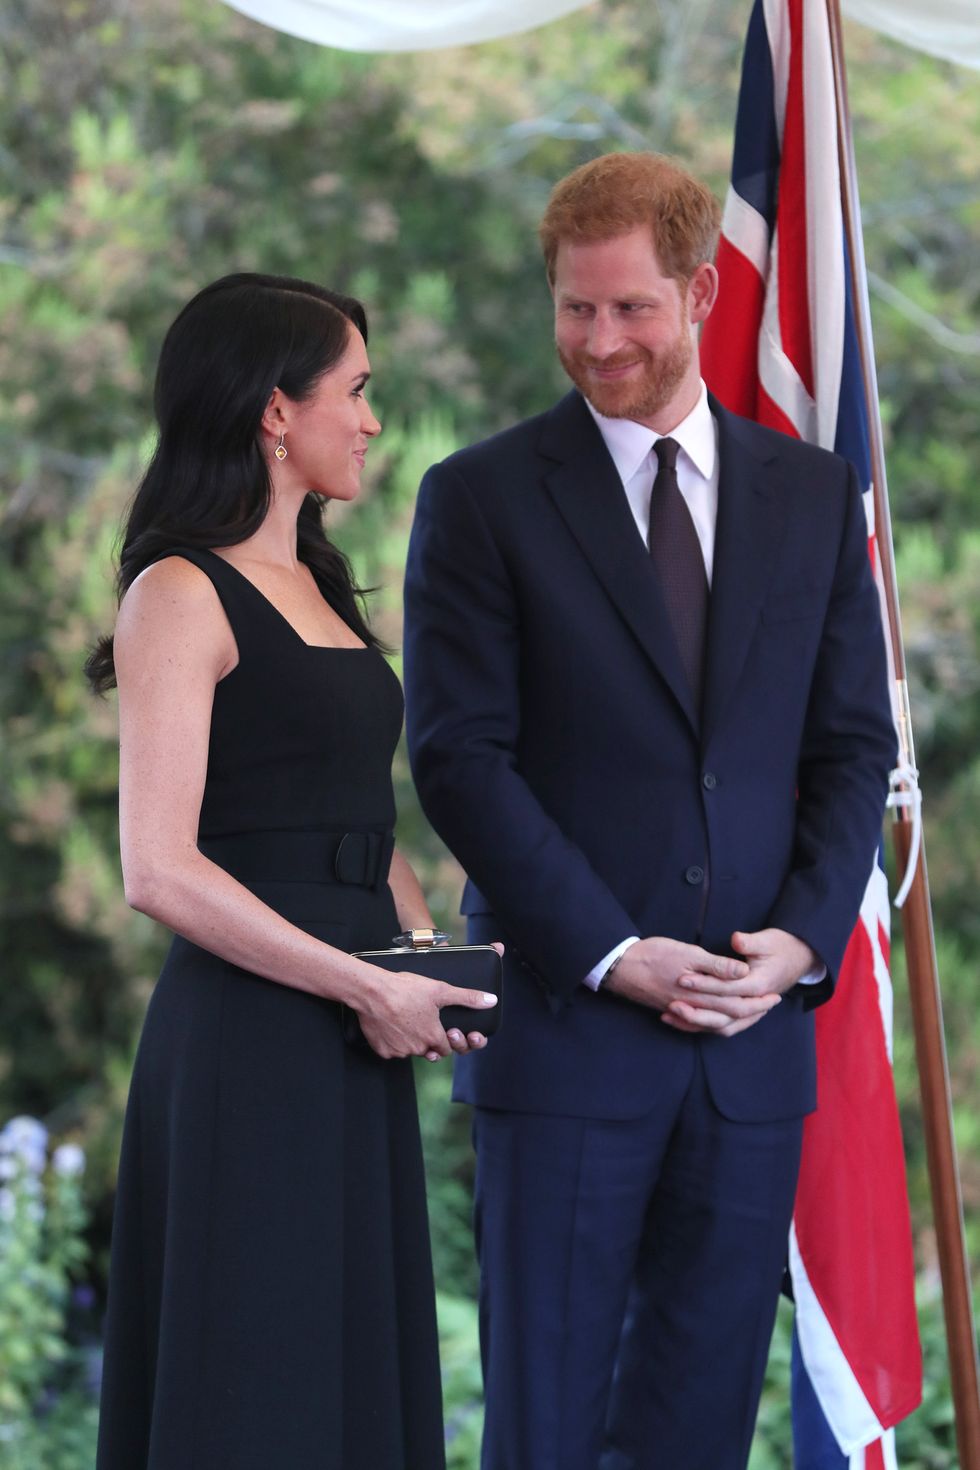 MeghanMarkle - Prince Harry - Meghan Markle -  Duke and Duchess of Sussex - Discussion  - Page 23 Hbz-prince-harry-meghan-markle-ireland-gettyimages-995588332-1531258394